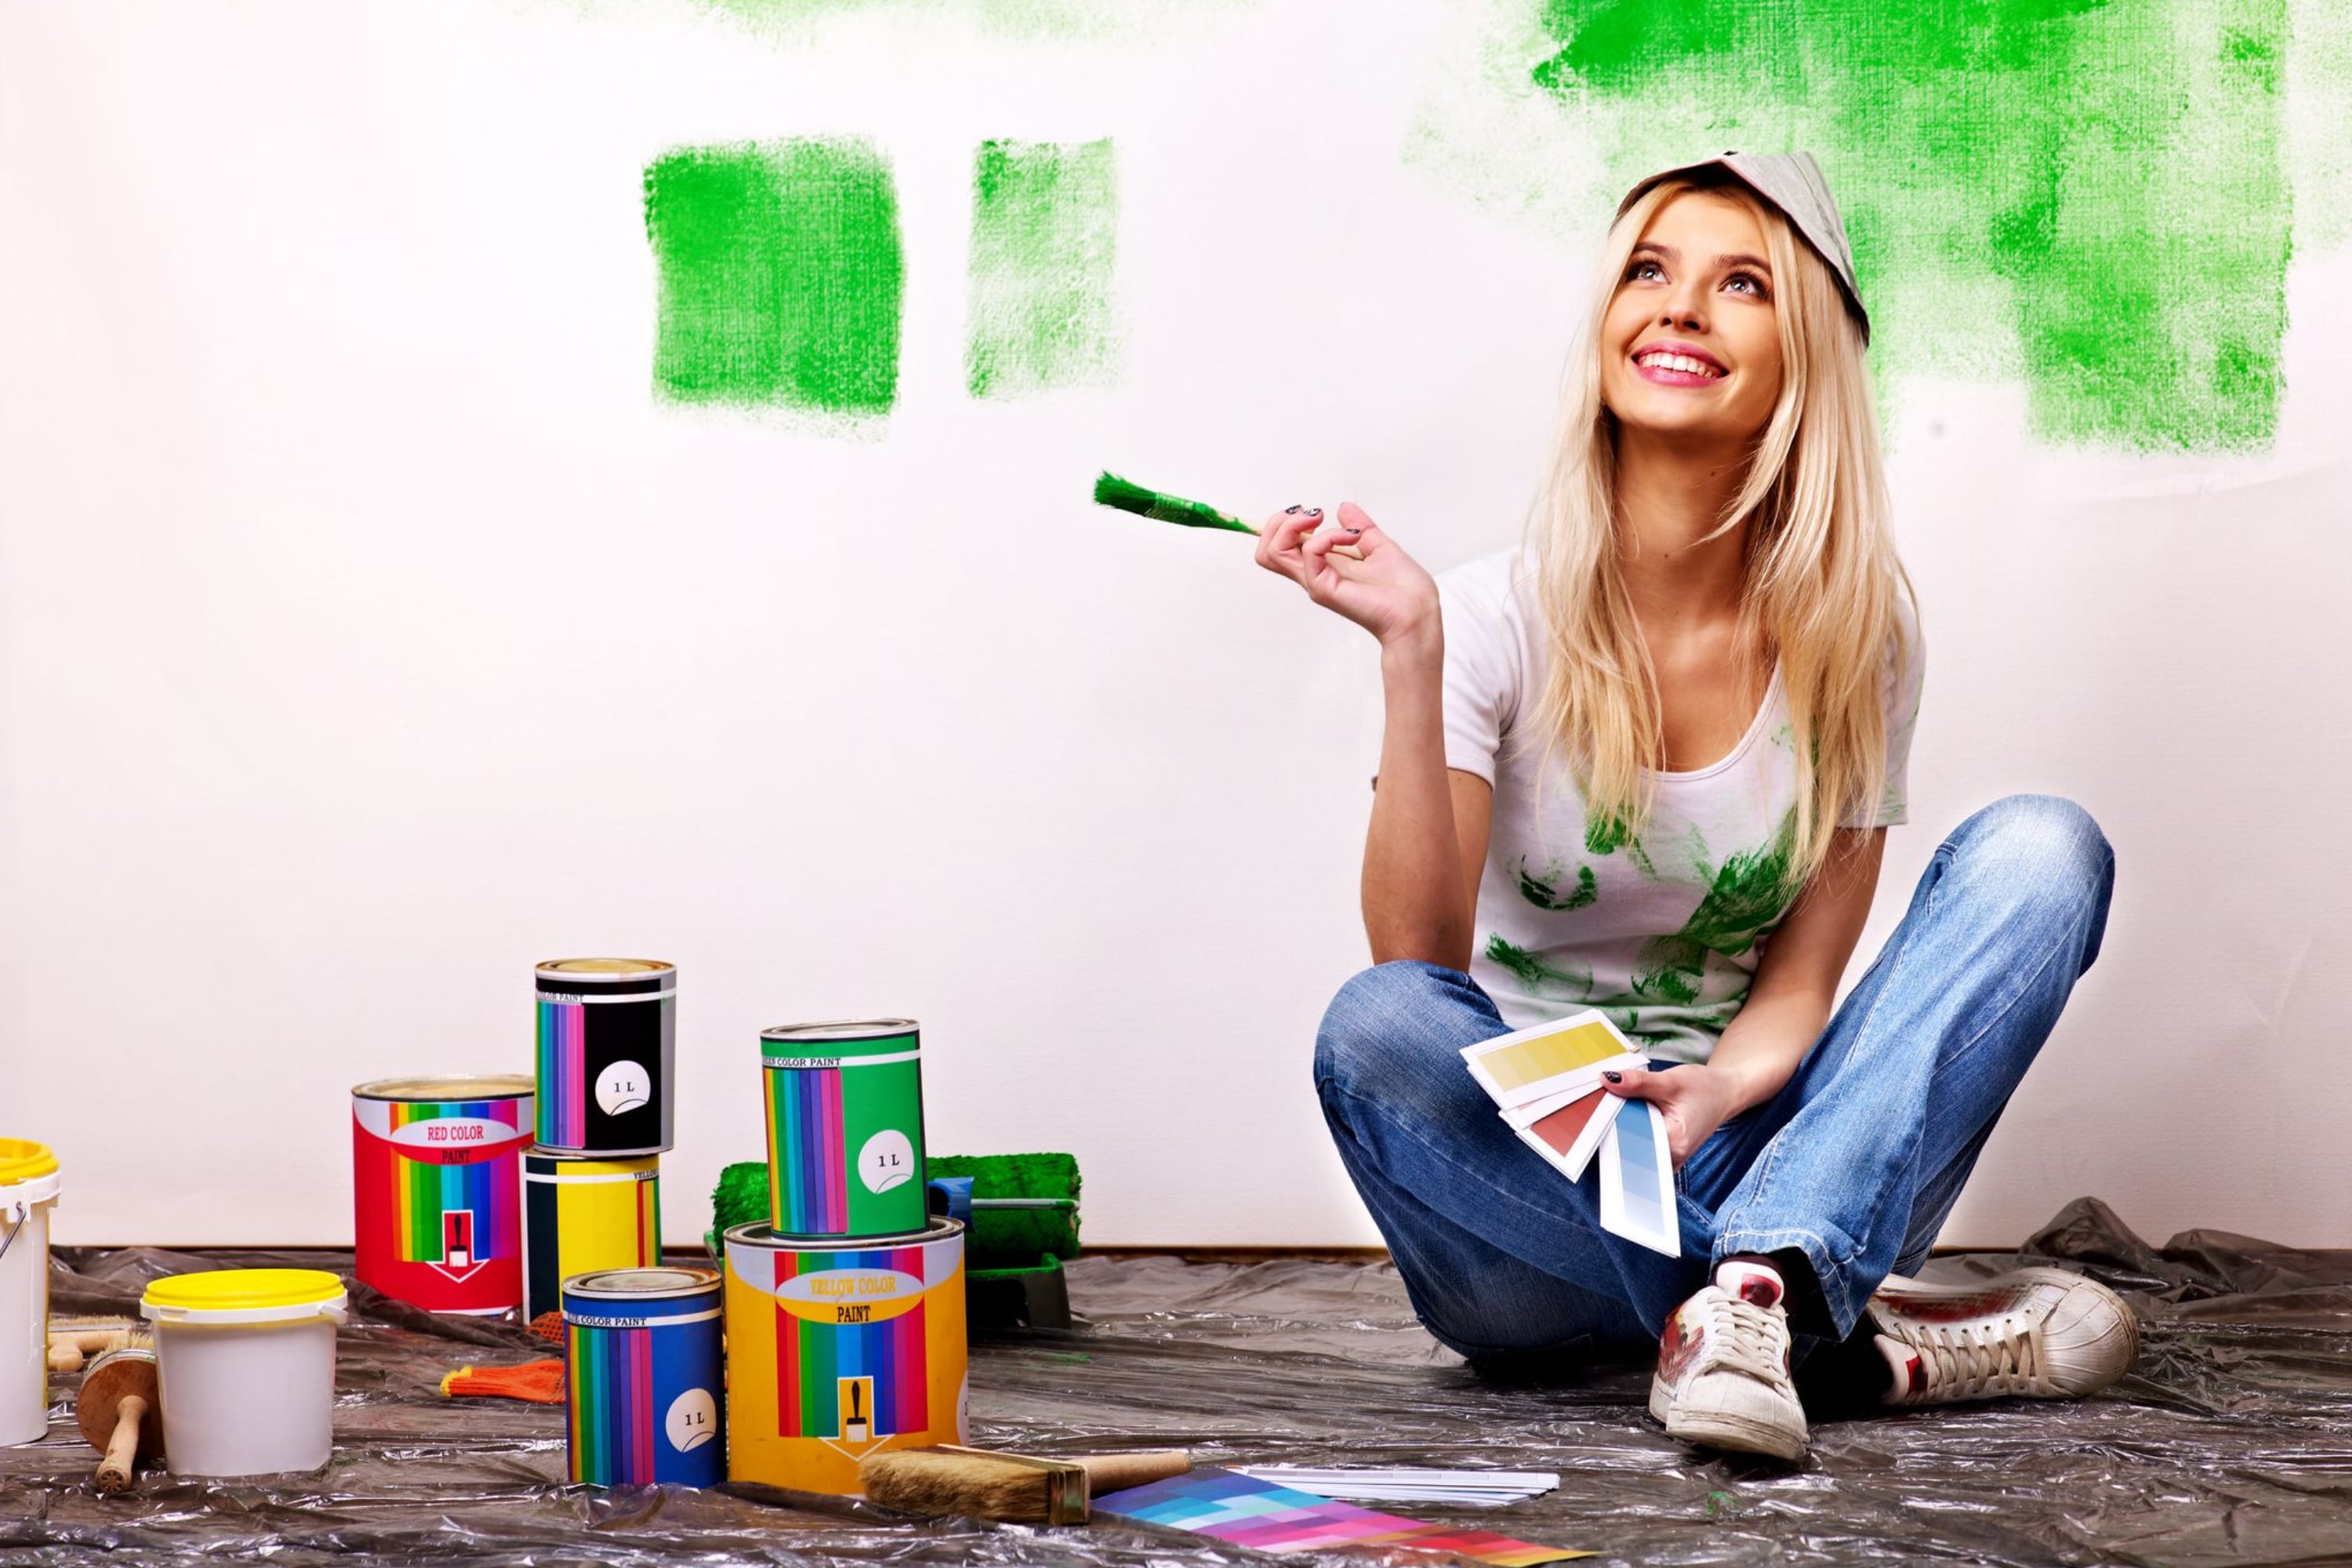 Do You Know What Type of Paint You Want to Use